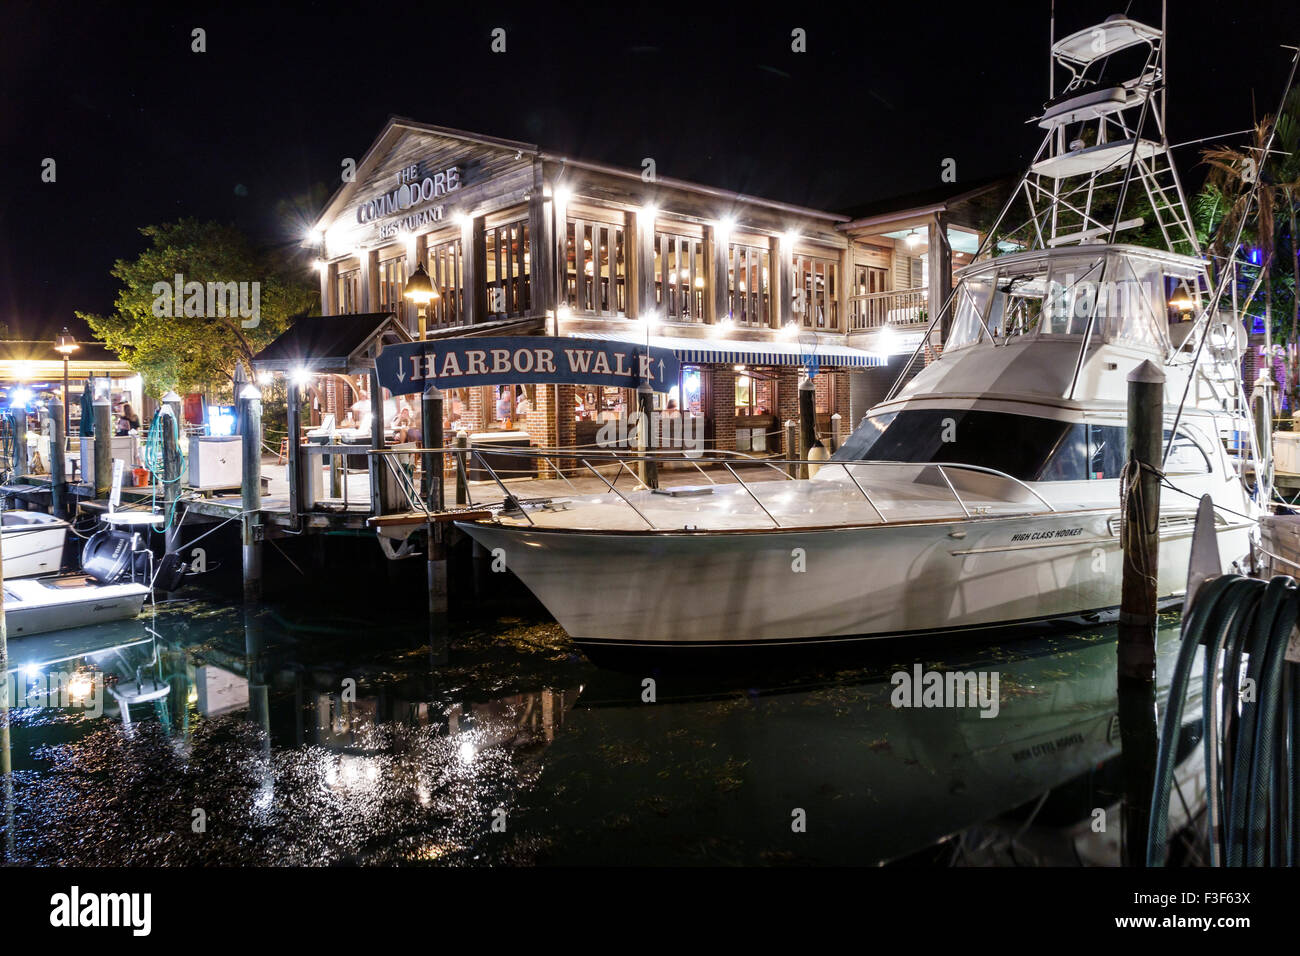 Key West Florida,Keys Old Town,Harbor Walk,harbour,bight,night evening,yacht,boat,The Commodore,restaurant restaurants food dining cafe cafes,FL150508 Stock Photo